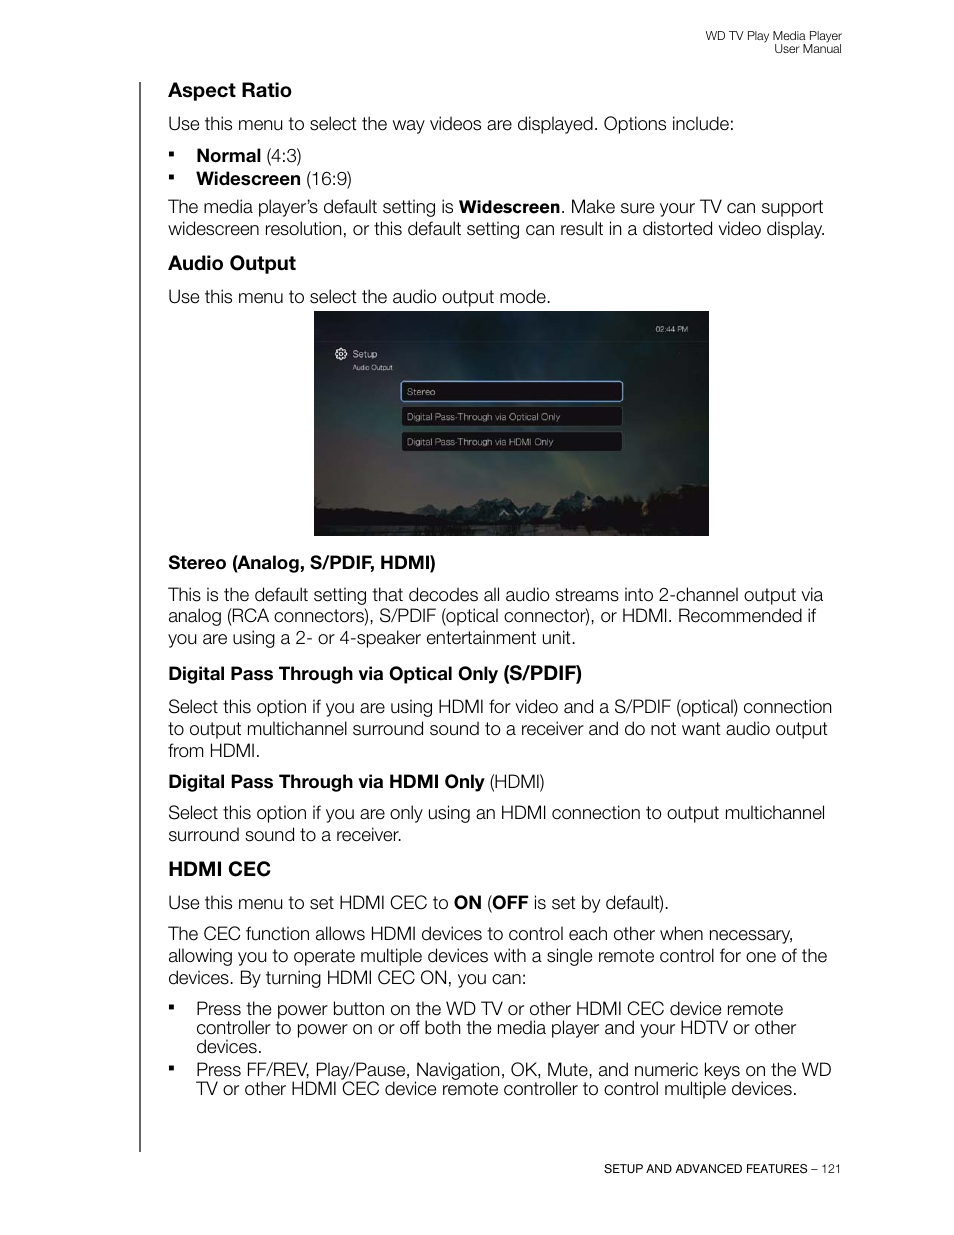 Aspect ratio, Audio output, Stereo (analog, s/pdif, hdmi) | Digital pass through via optical only (s/pdif), Hdmi cec, S/pdif) | Western Digital WD TV Play Media Player User Manual User Manual | Page 126 / 171